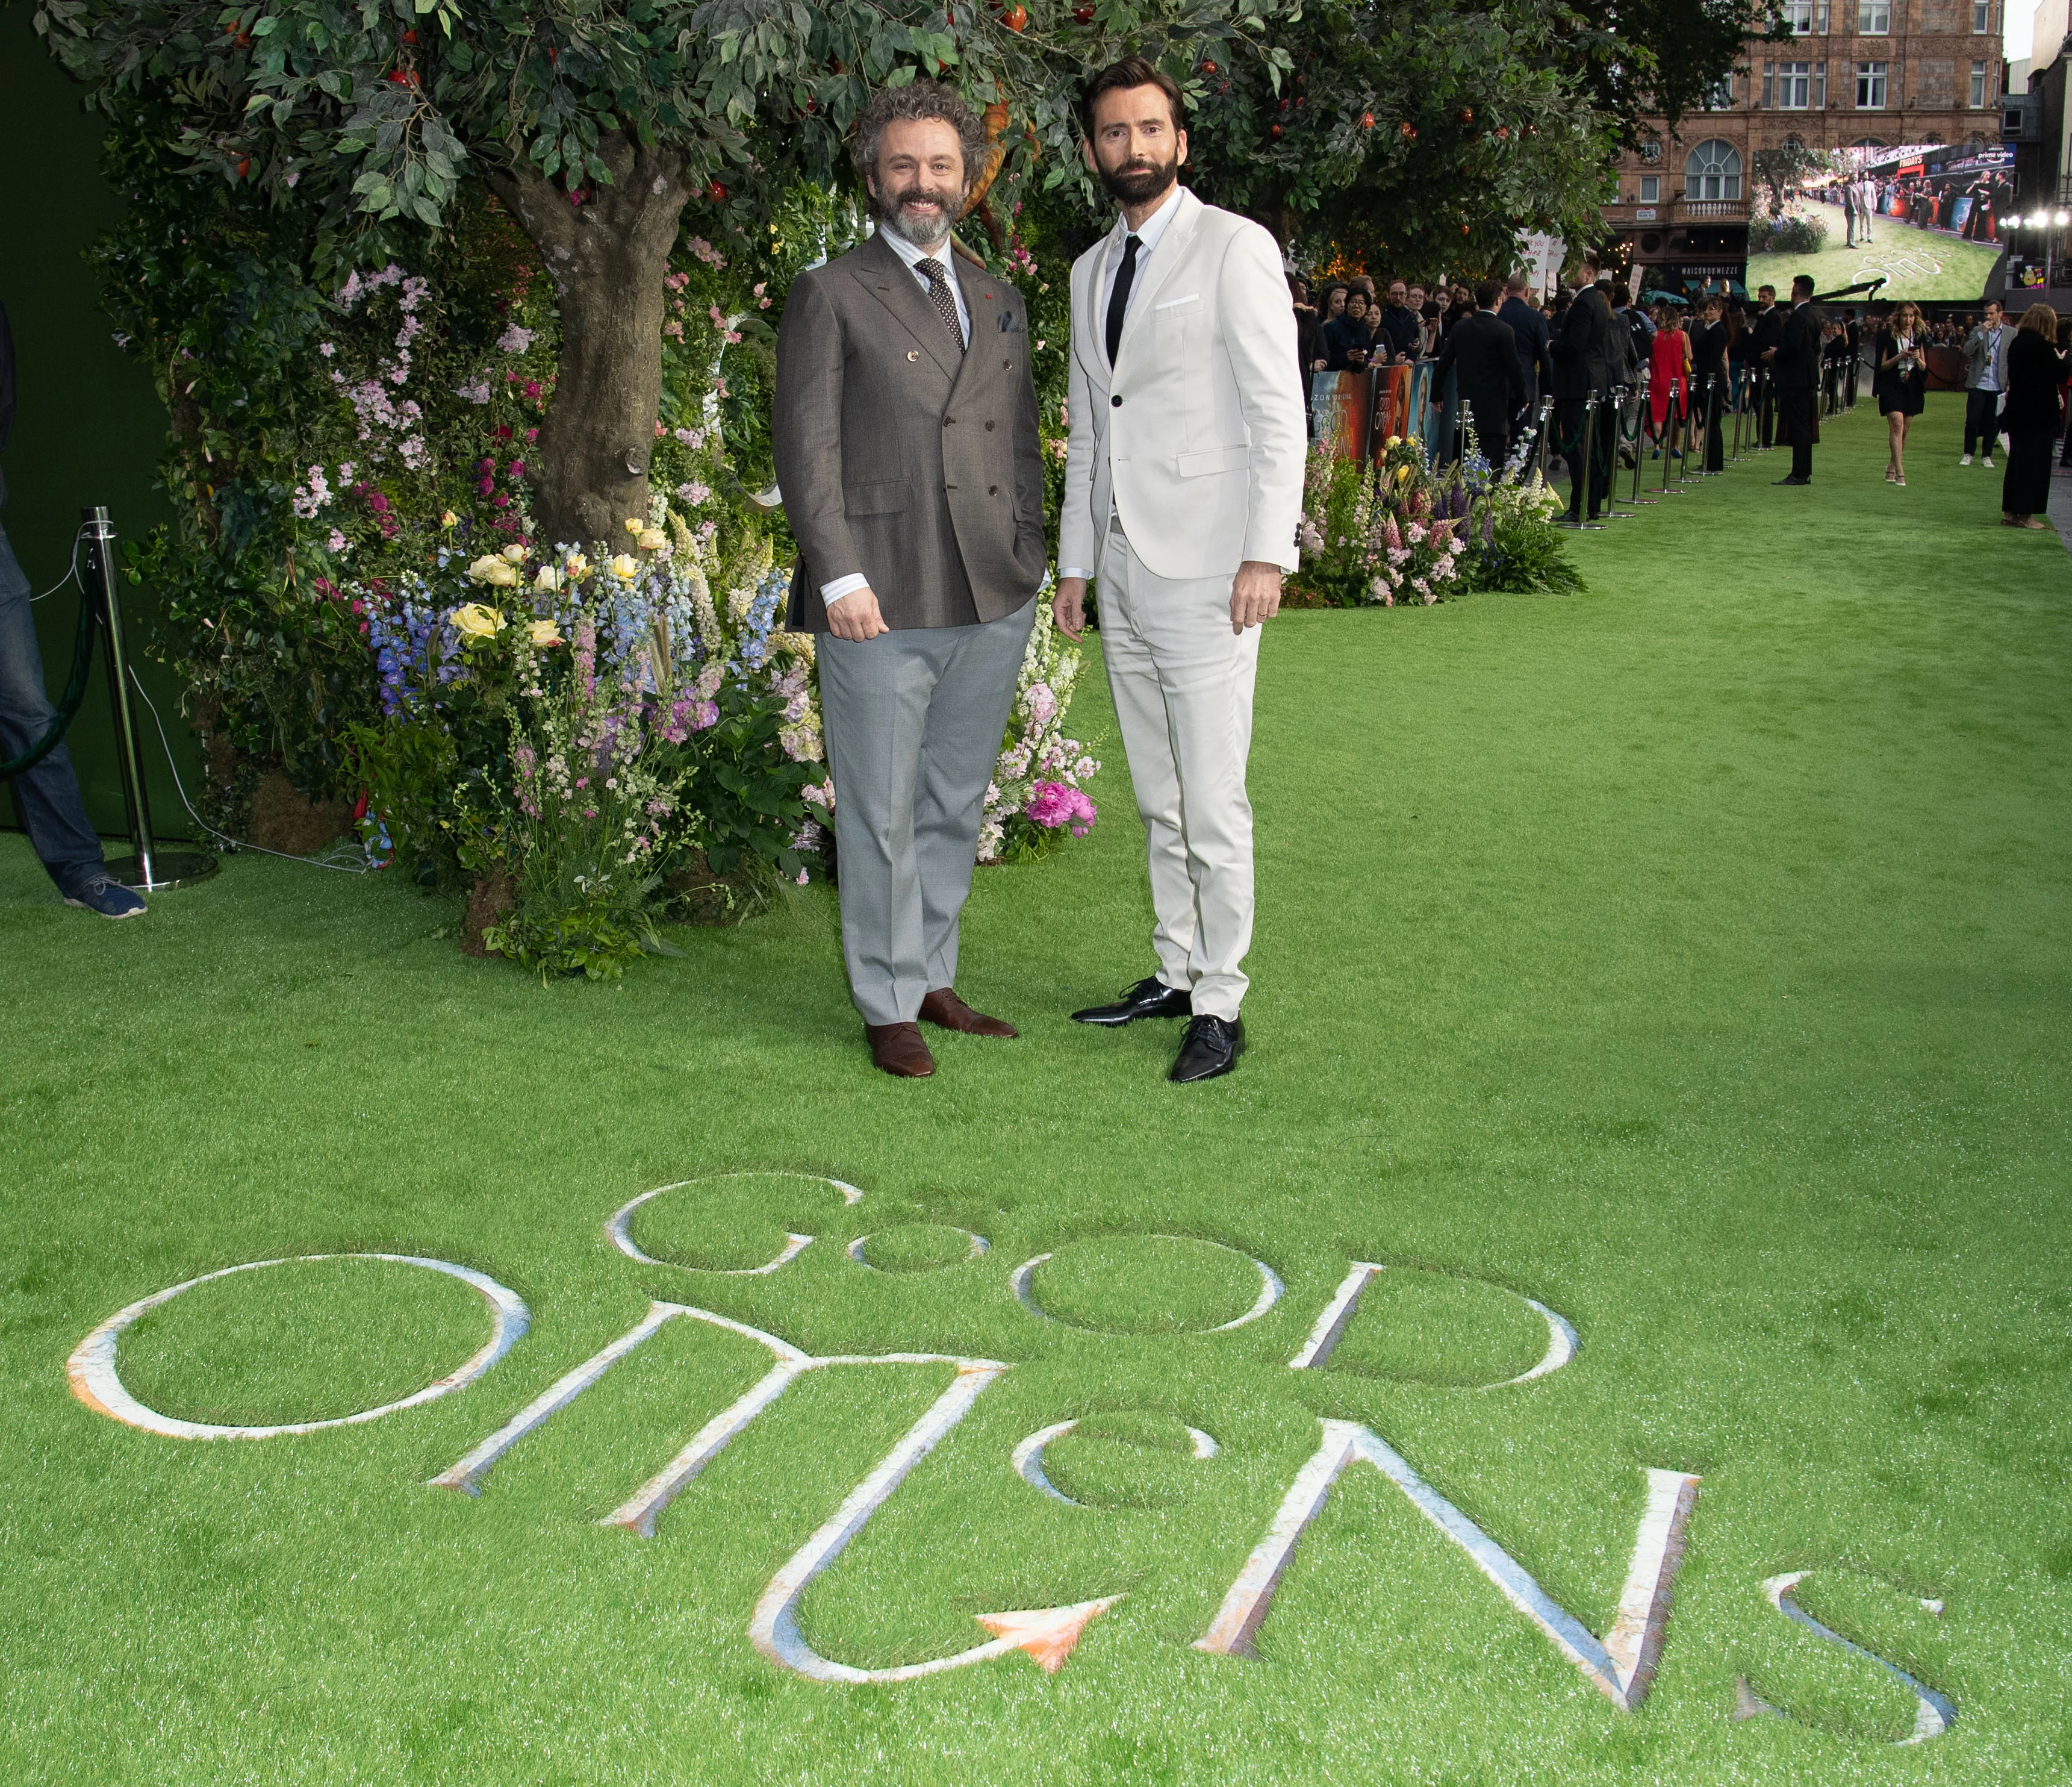 Michael Sheen and David Tennant attend The World Premiere of Good Omens